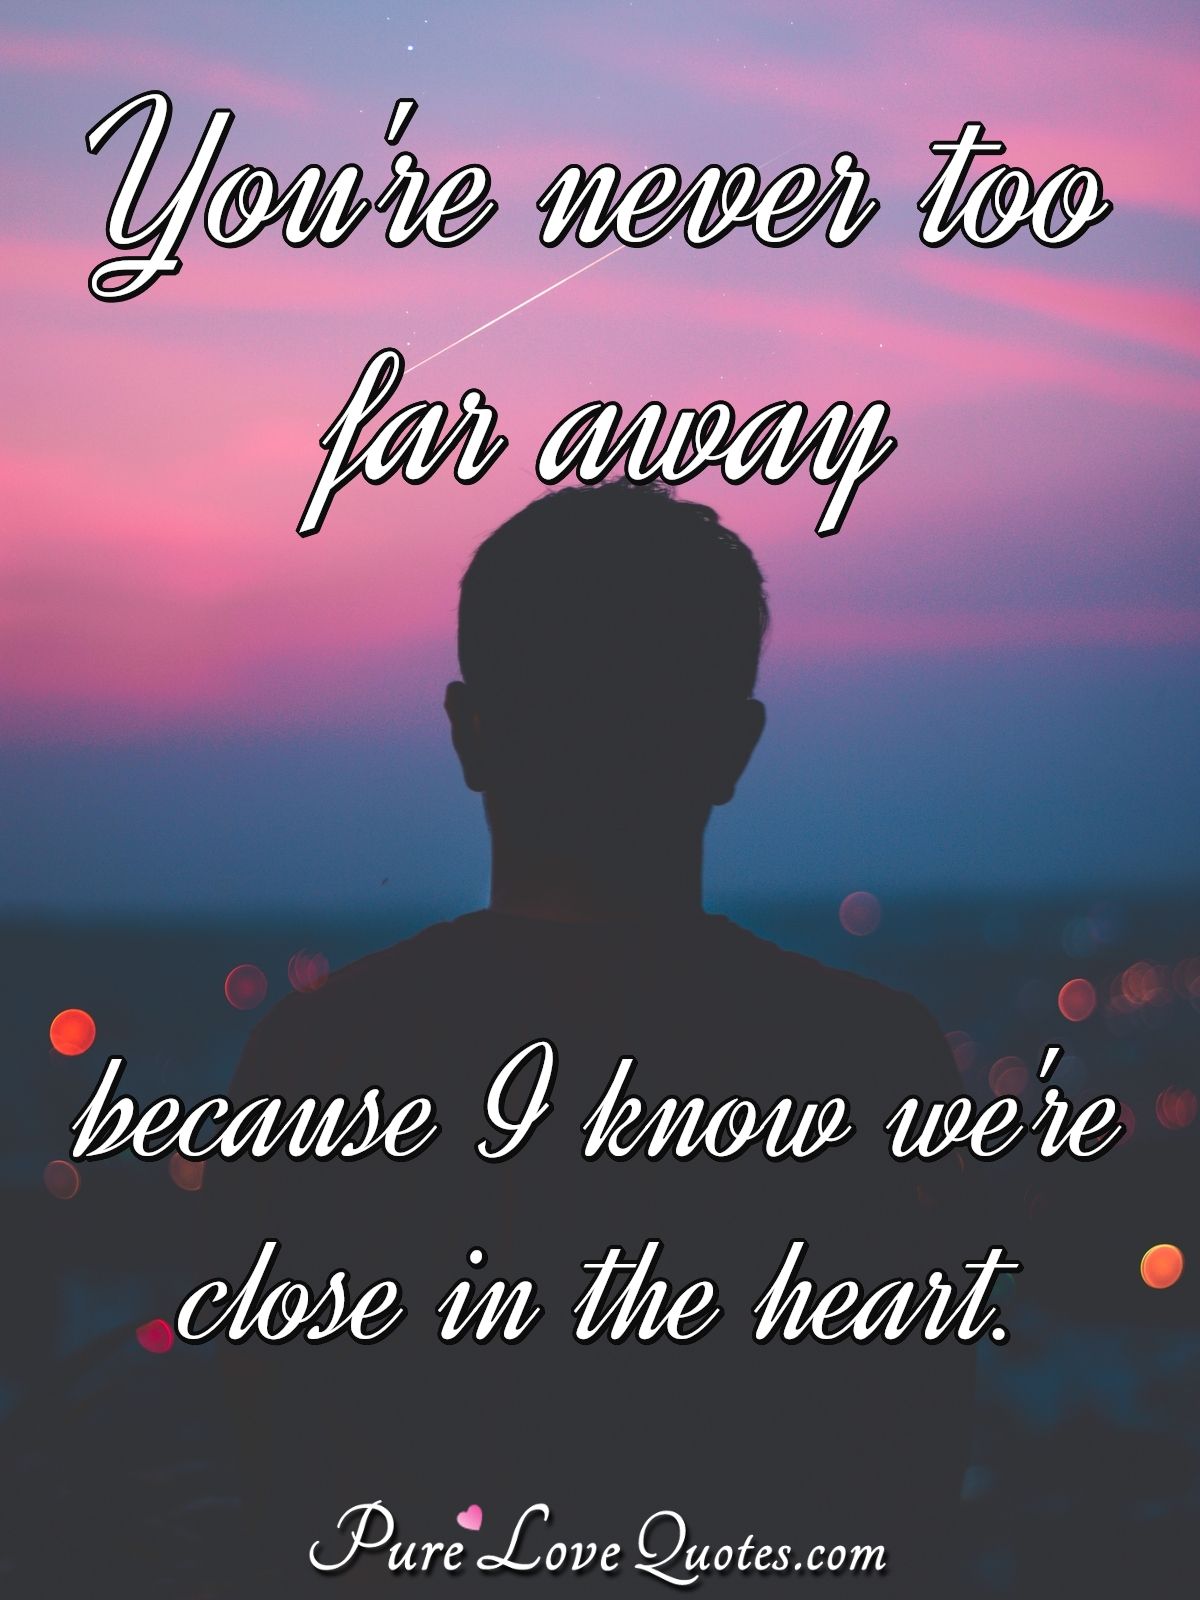 You're never too far away because I know we're close in the heart. - Anonymous